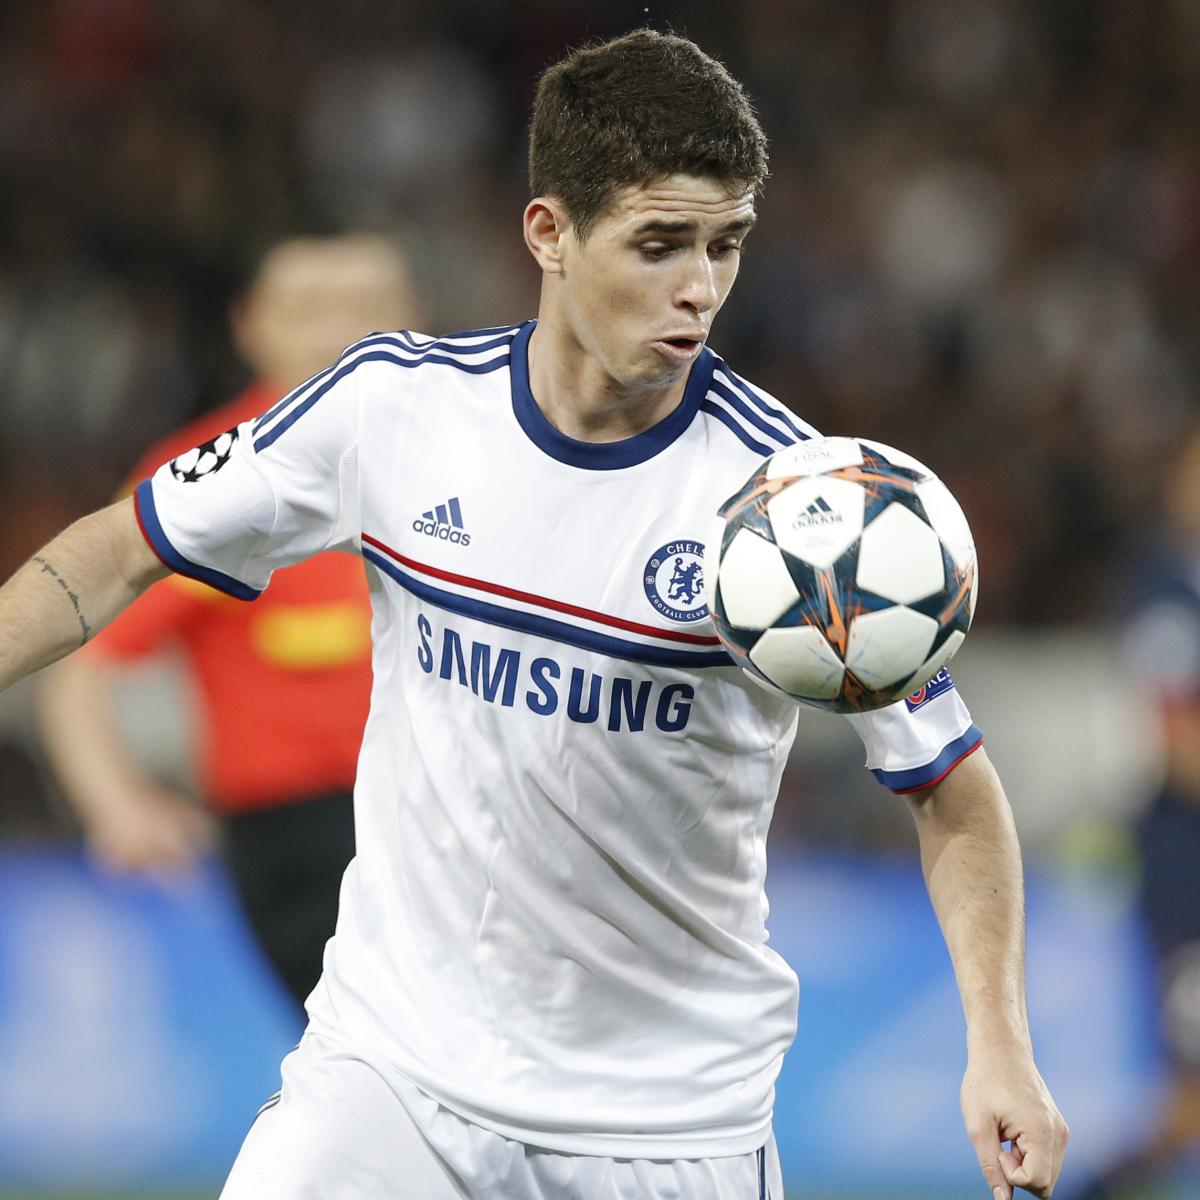 How Much is Chelsea Midfielder Oscar Worth Based on Form in 2014